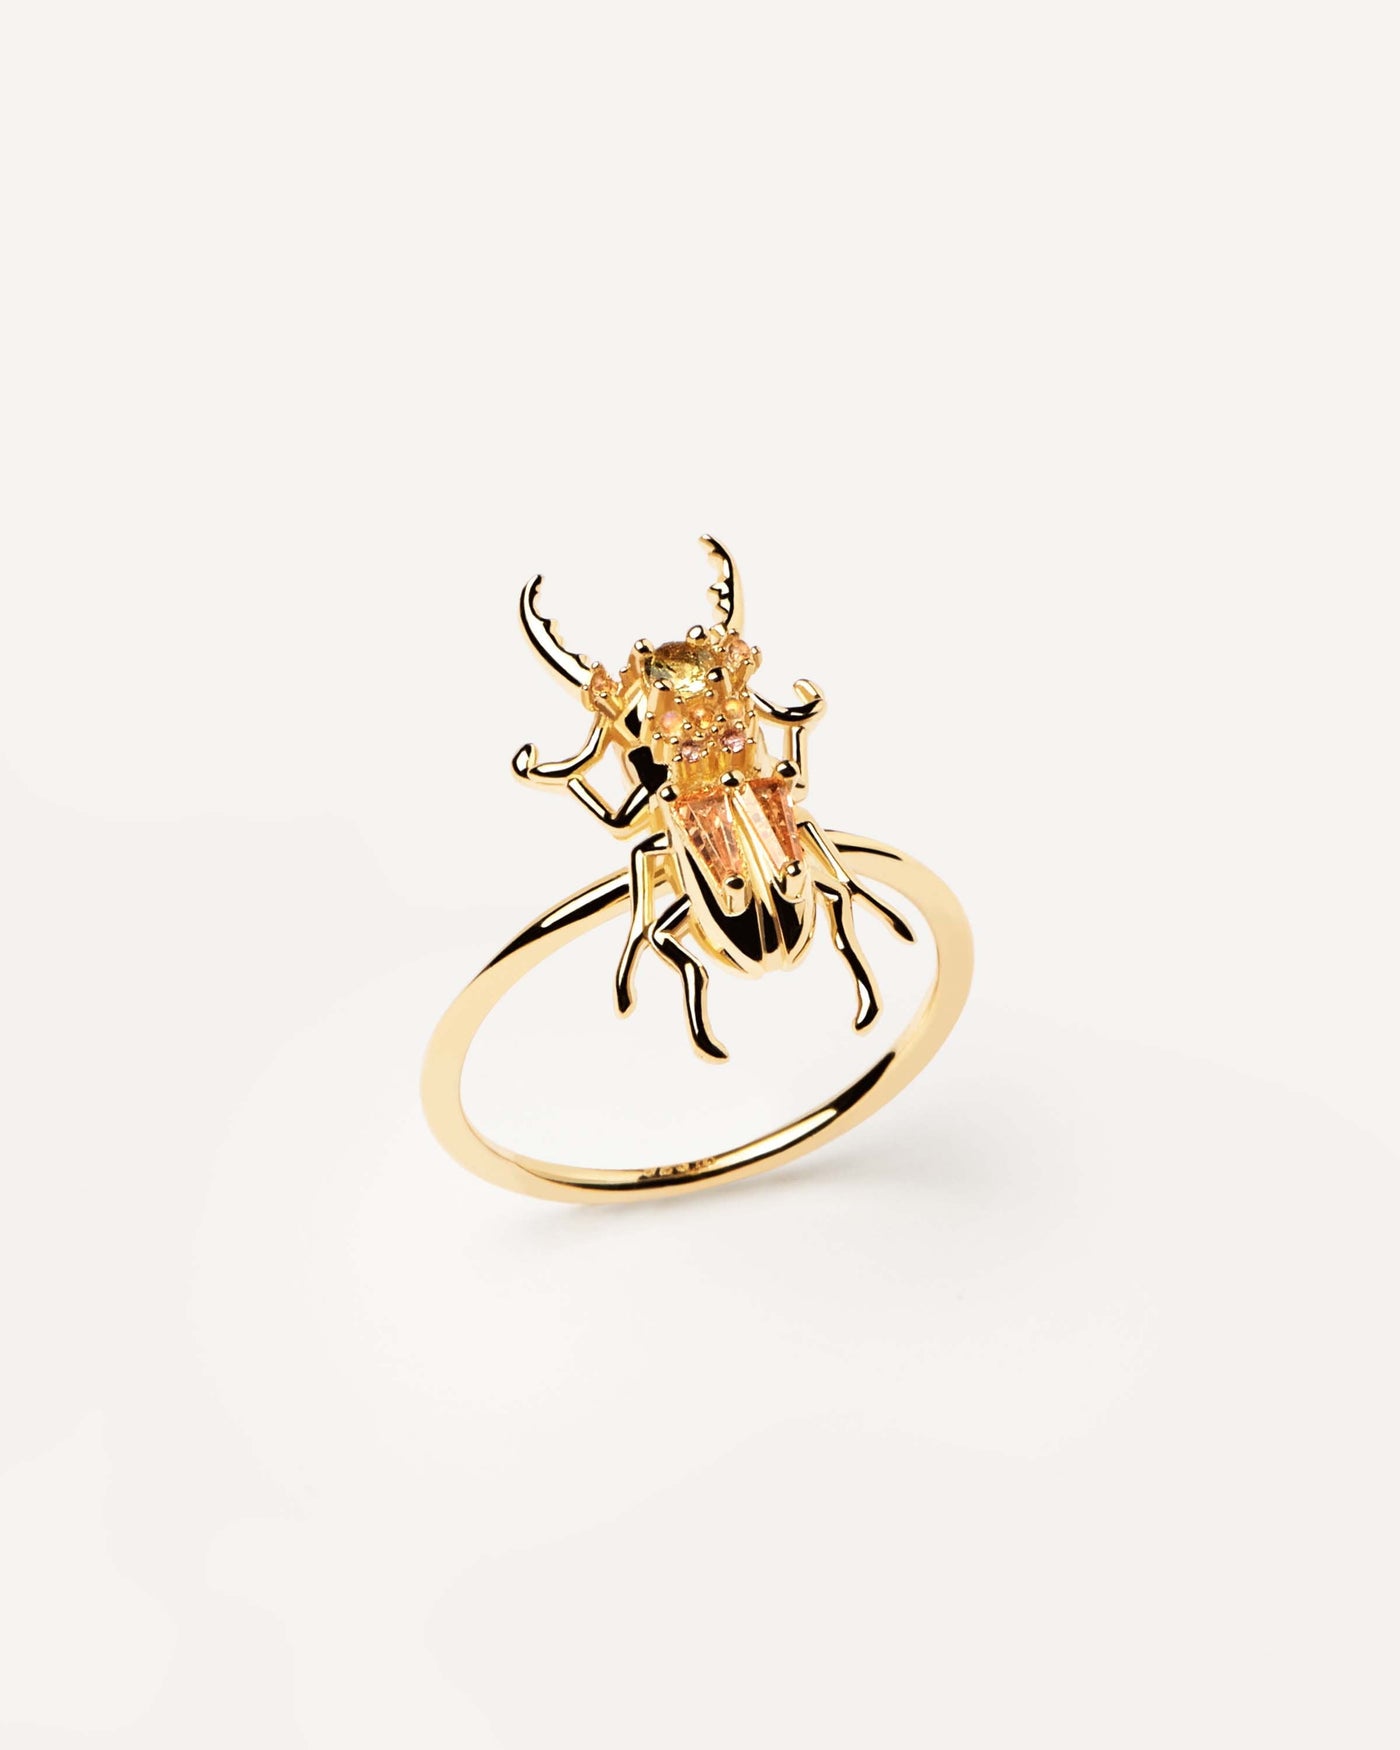 2023 Selection | Courage Beetle Gold Ring. Get the latest arrival from PDPAOLA. Place your order safely and get this Best Seller. Free Shipping over 40€